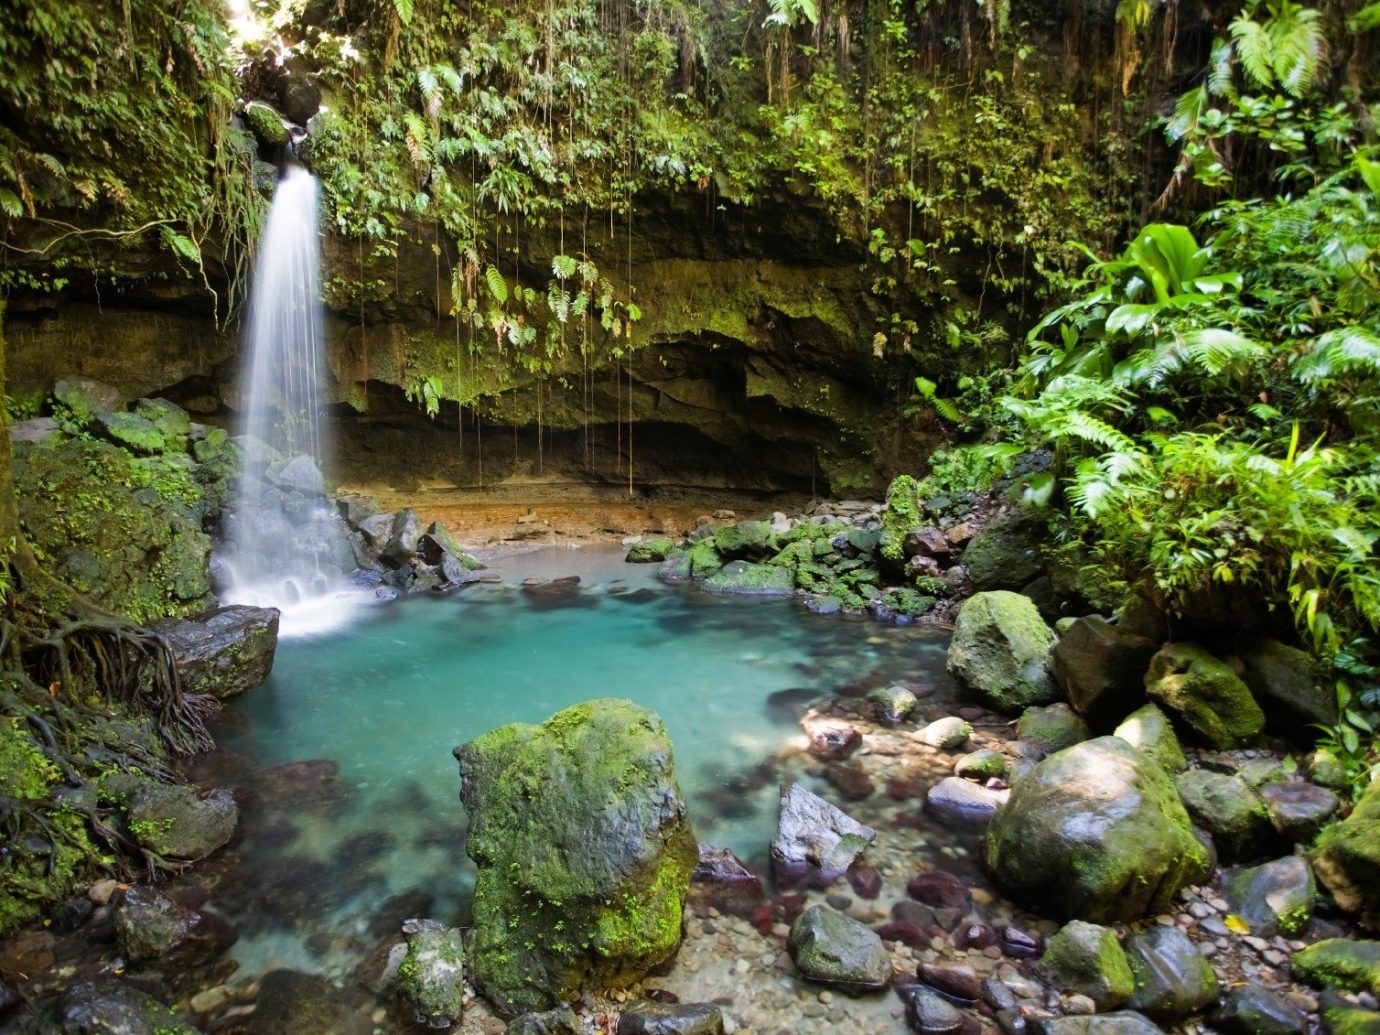 caribbean Secret Getaways Trip Ideas outdoor habitat Nature Waterfall vegetation body of water water watercourse rock stream rainforest water feature Forest River Jungle woodland old growth forest area surrounded